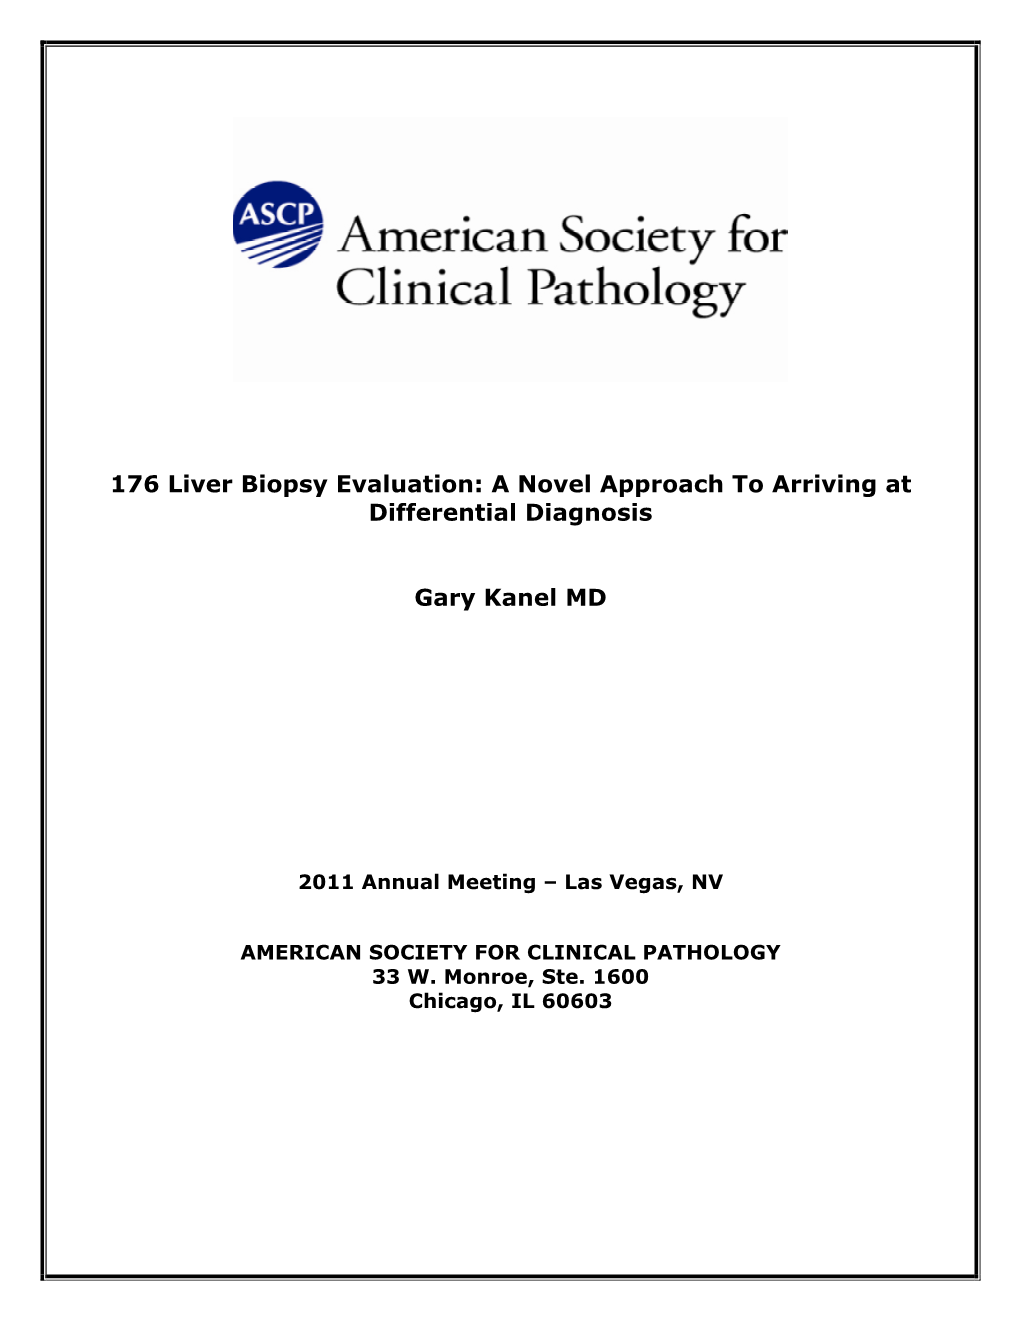 176 Liver Biopsy Evaluation: a Novel Approach to Arriving at Differential Diagnosis